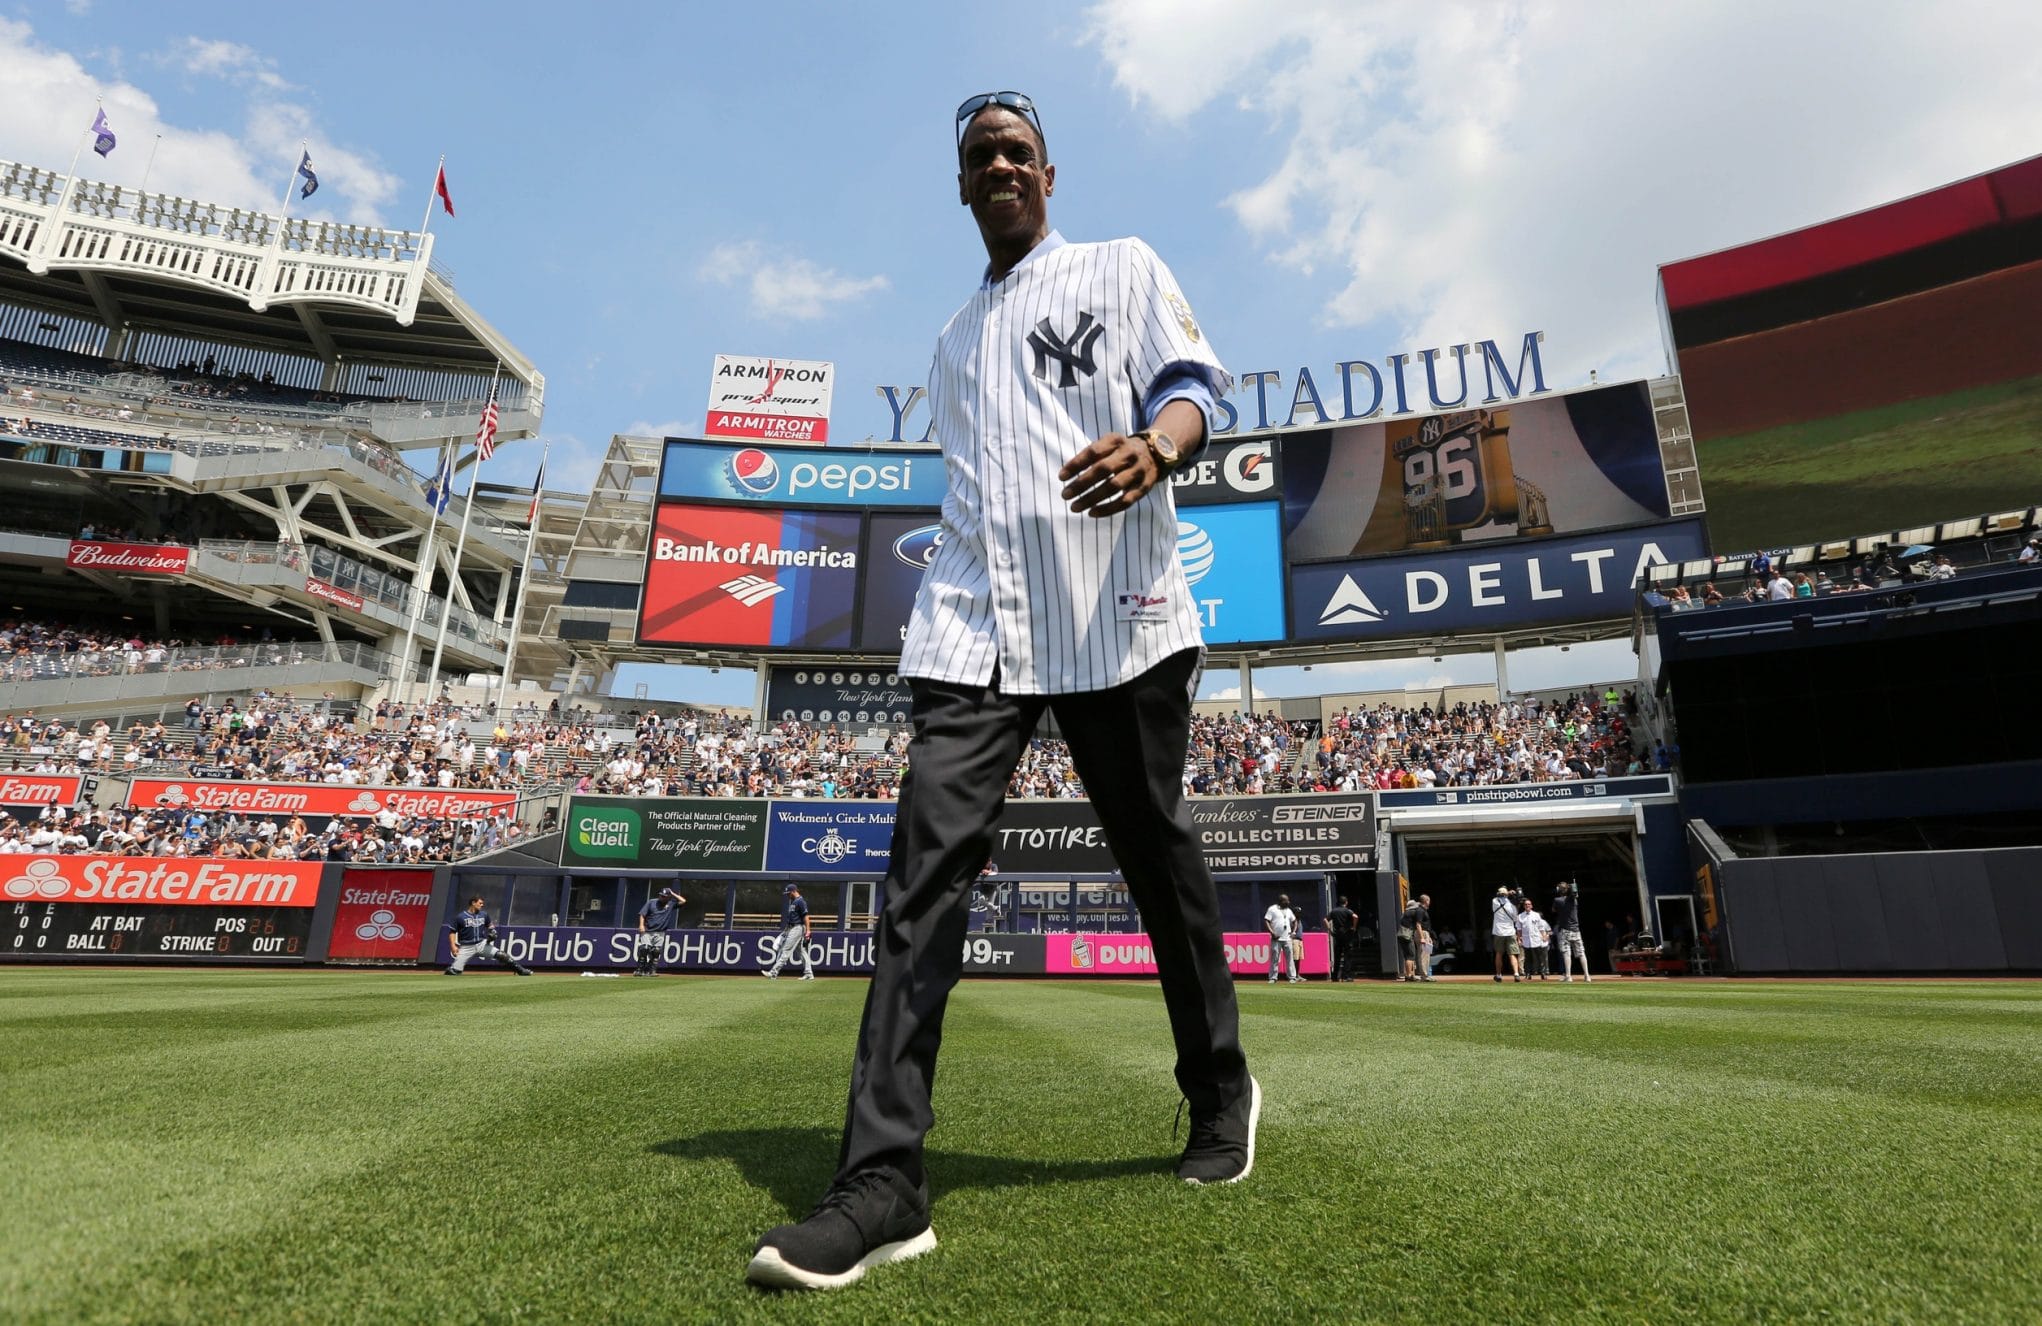 Dwight Gooden’s Addiction Troubles Continue, Says Former Teammate Darryl Strawberry 